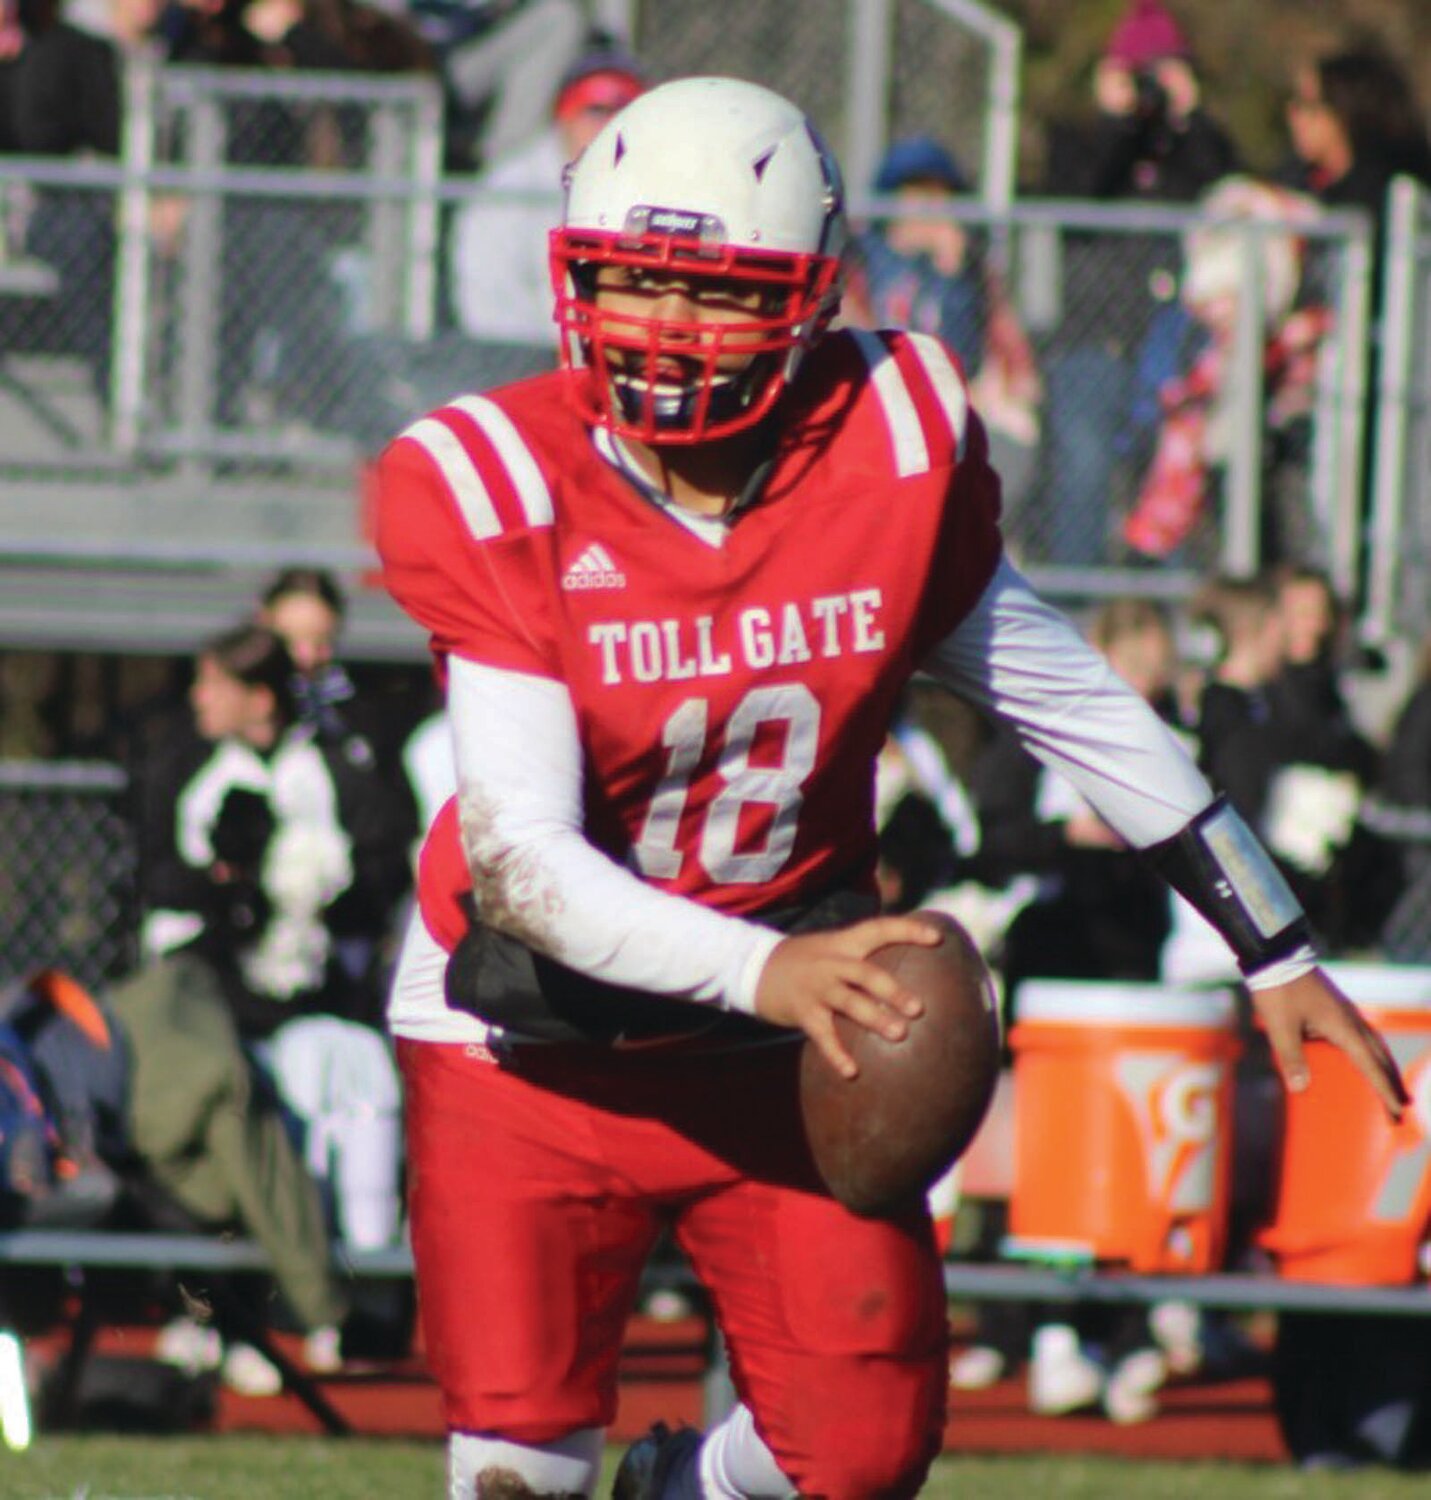 ROLLING OUT: Toll Gate quarterback Jayden Pina rolls out to pass in the first quarter of the Beacon Bowl last week.